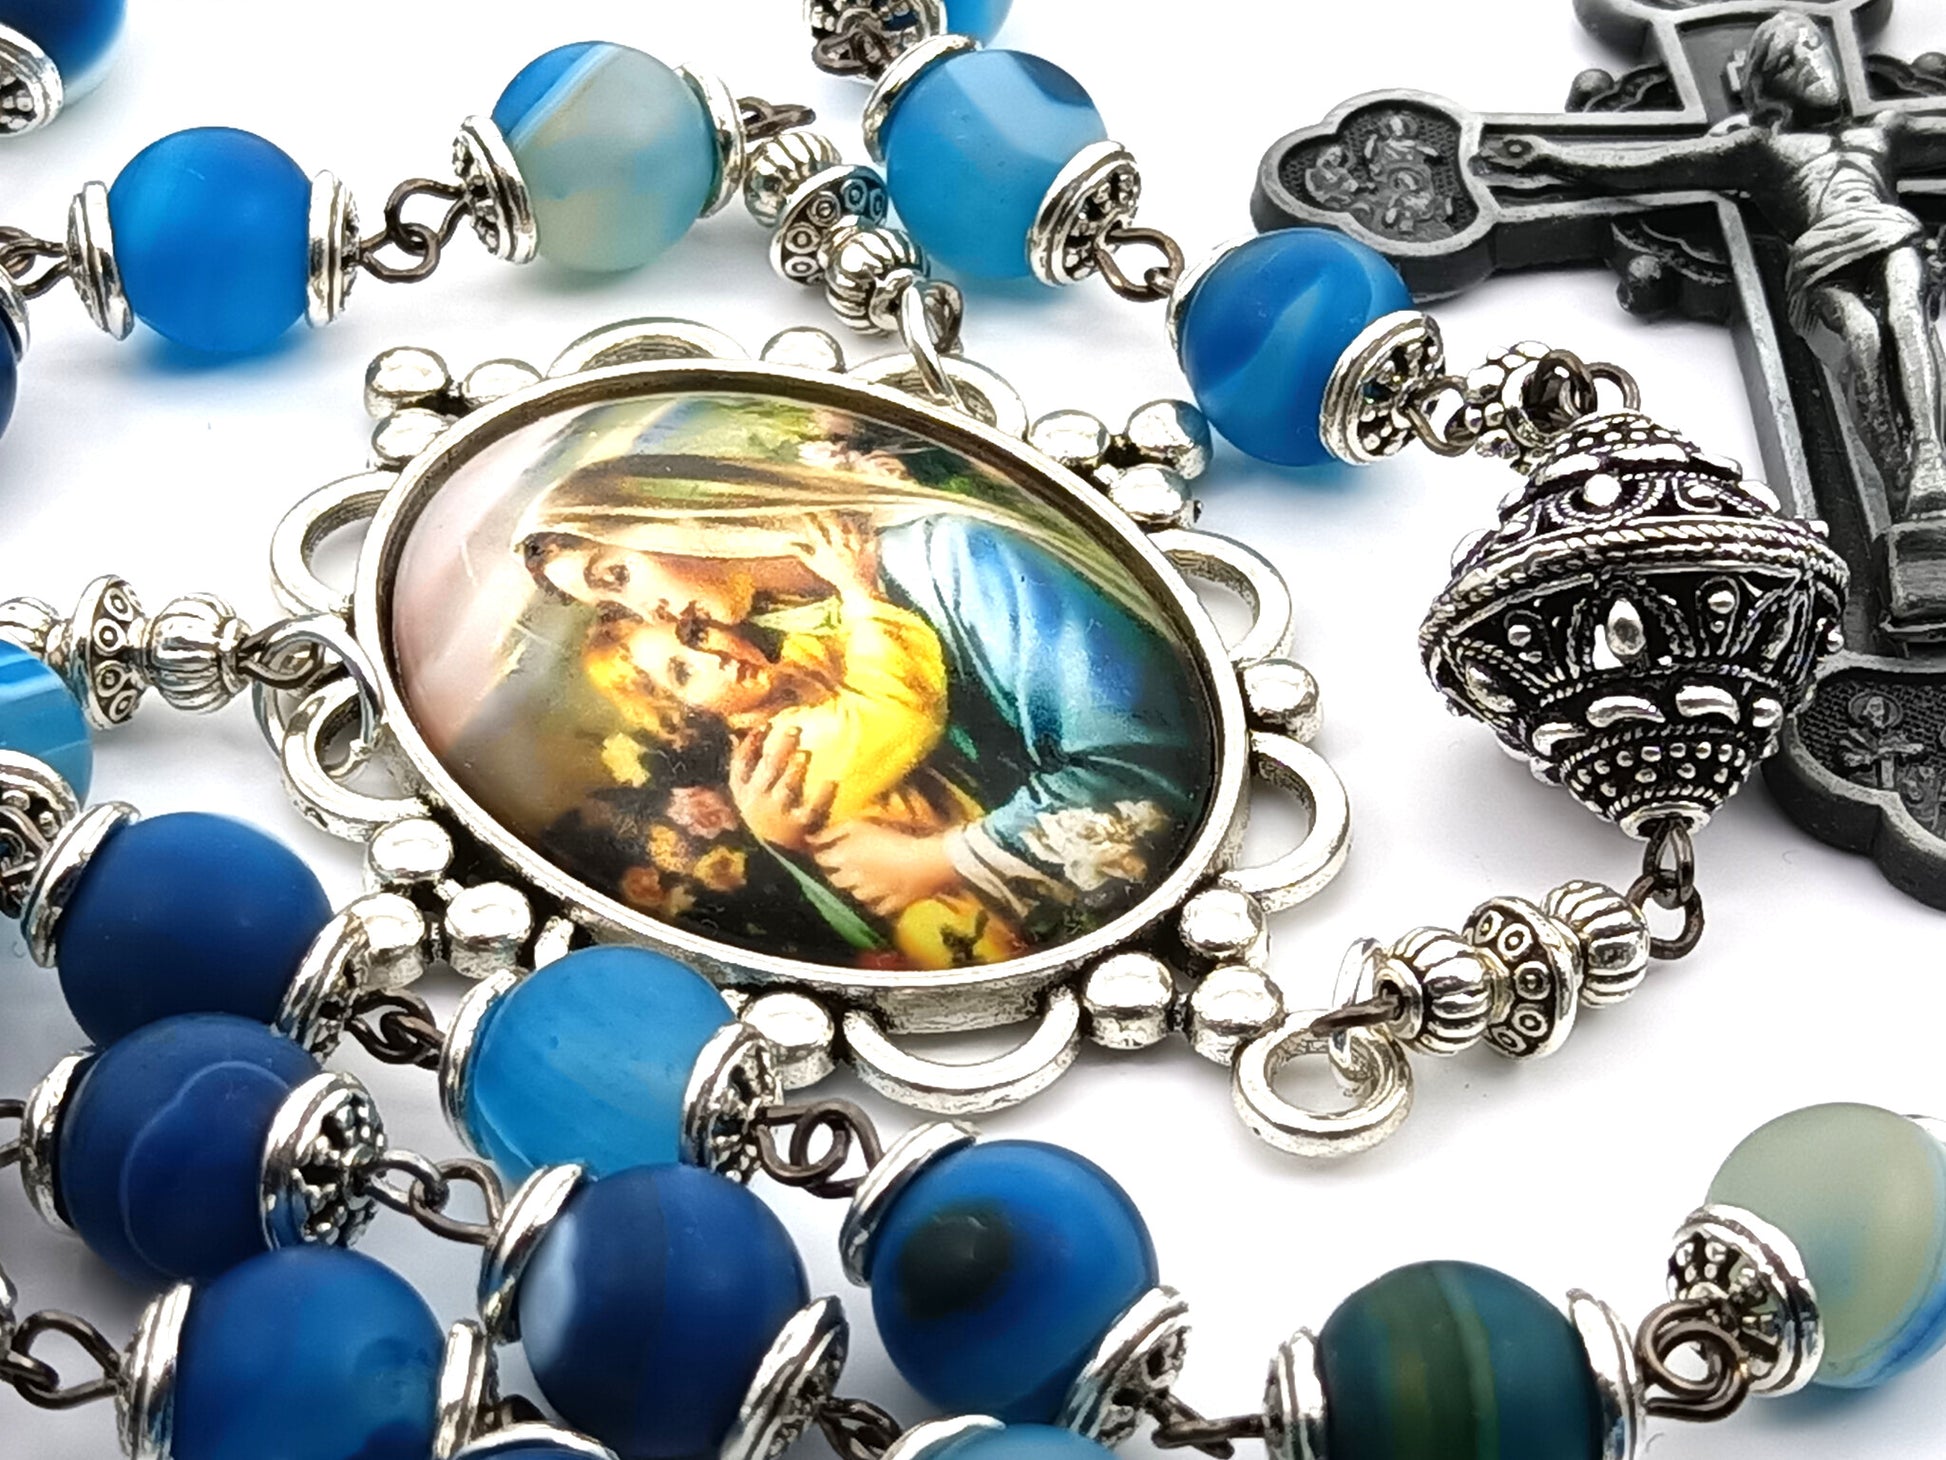 Virgin and Child unique rosary beads with blue gemstone beads, pewter crucifix, silver pater beads, bead caps and picture centre medal.